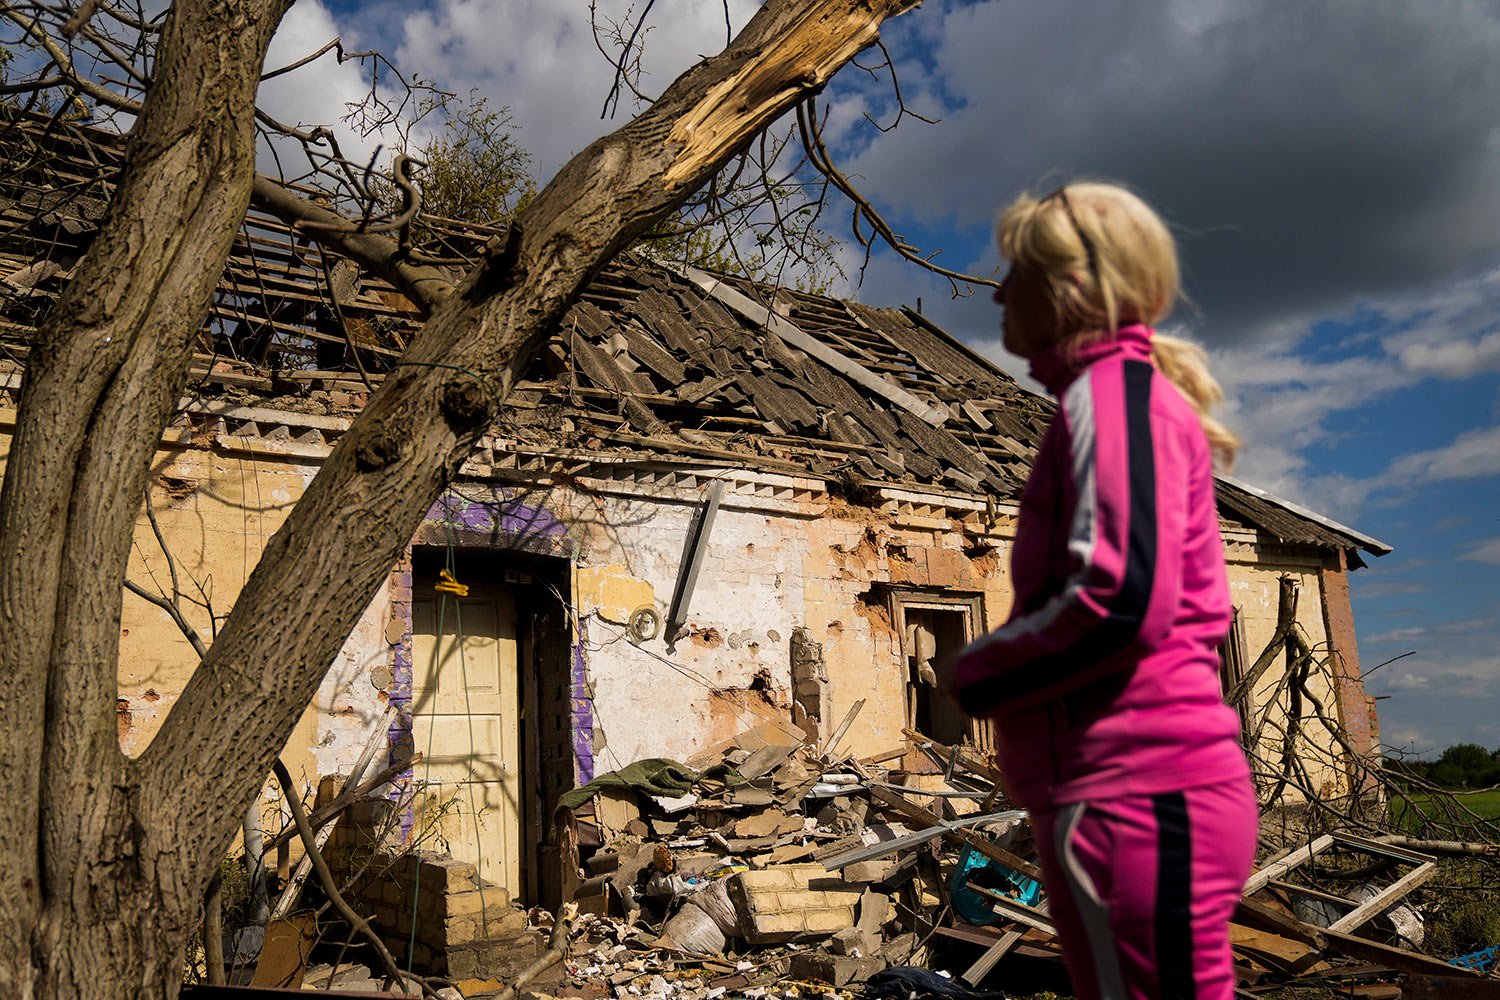  Iryna Martsyniuk, 50, stands next to her heavily damaged house after a Russian bombing in Velyka Kostromka village, Ukraine, Thursday, May 19, 2022. Martsyniuk and her three young children were at home when the attack occurred in the village, a few 